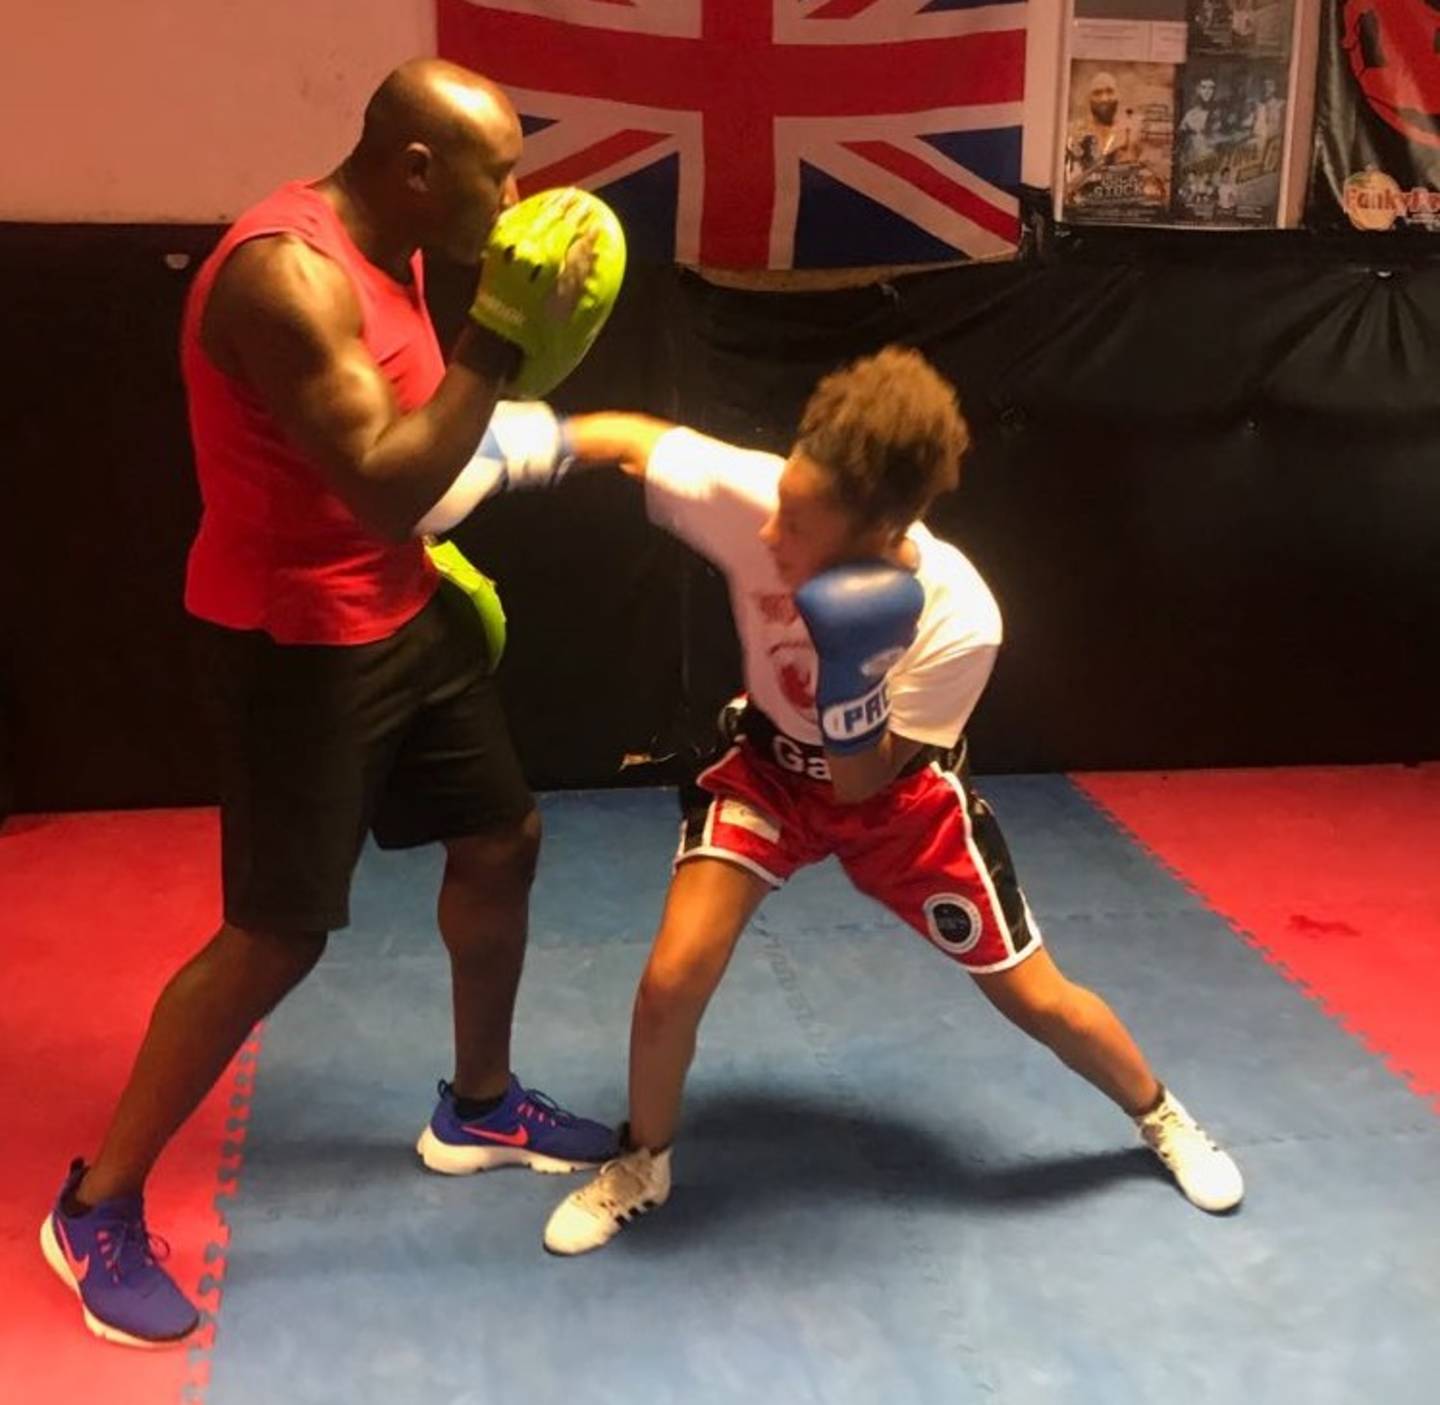 Gabrielle boxing pads with her trainer